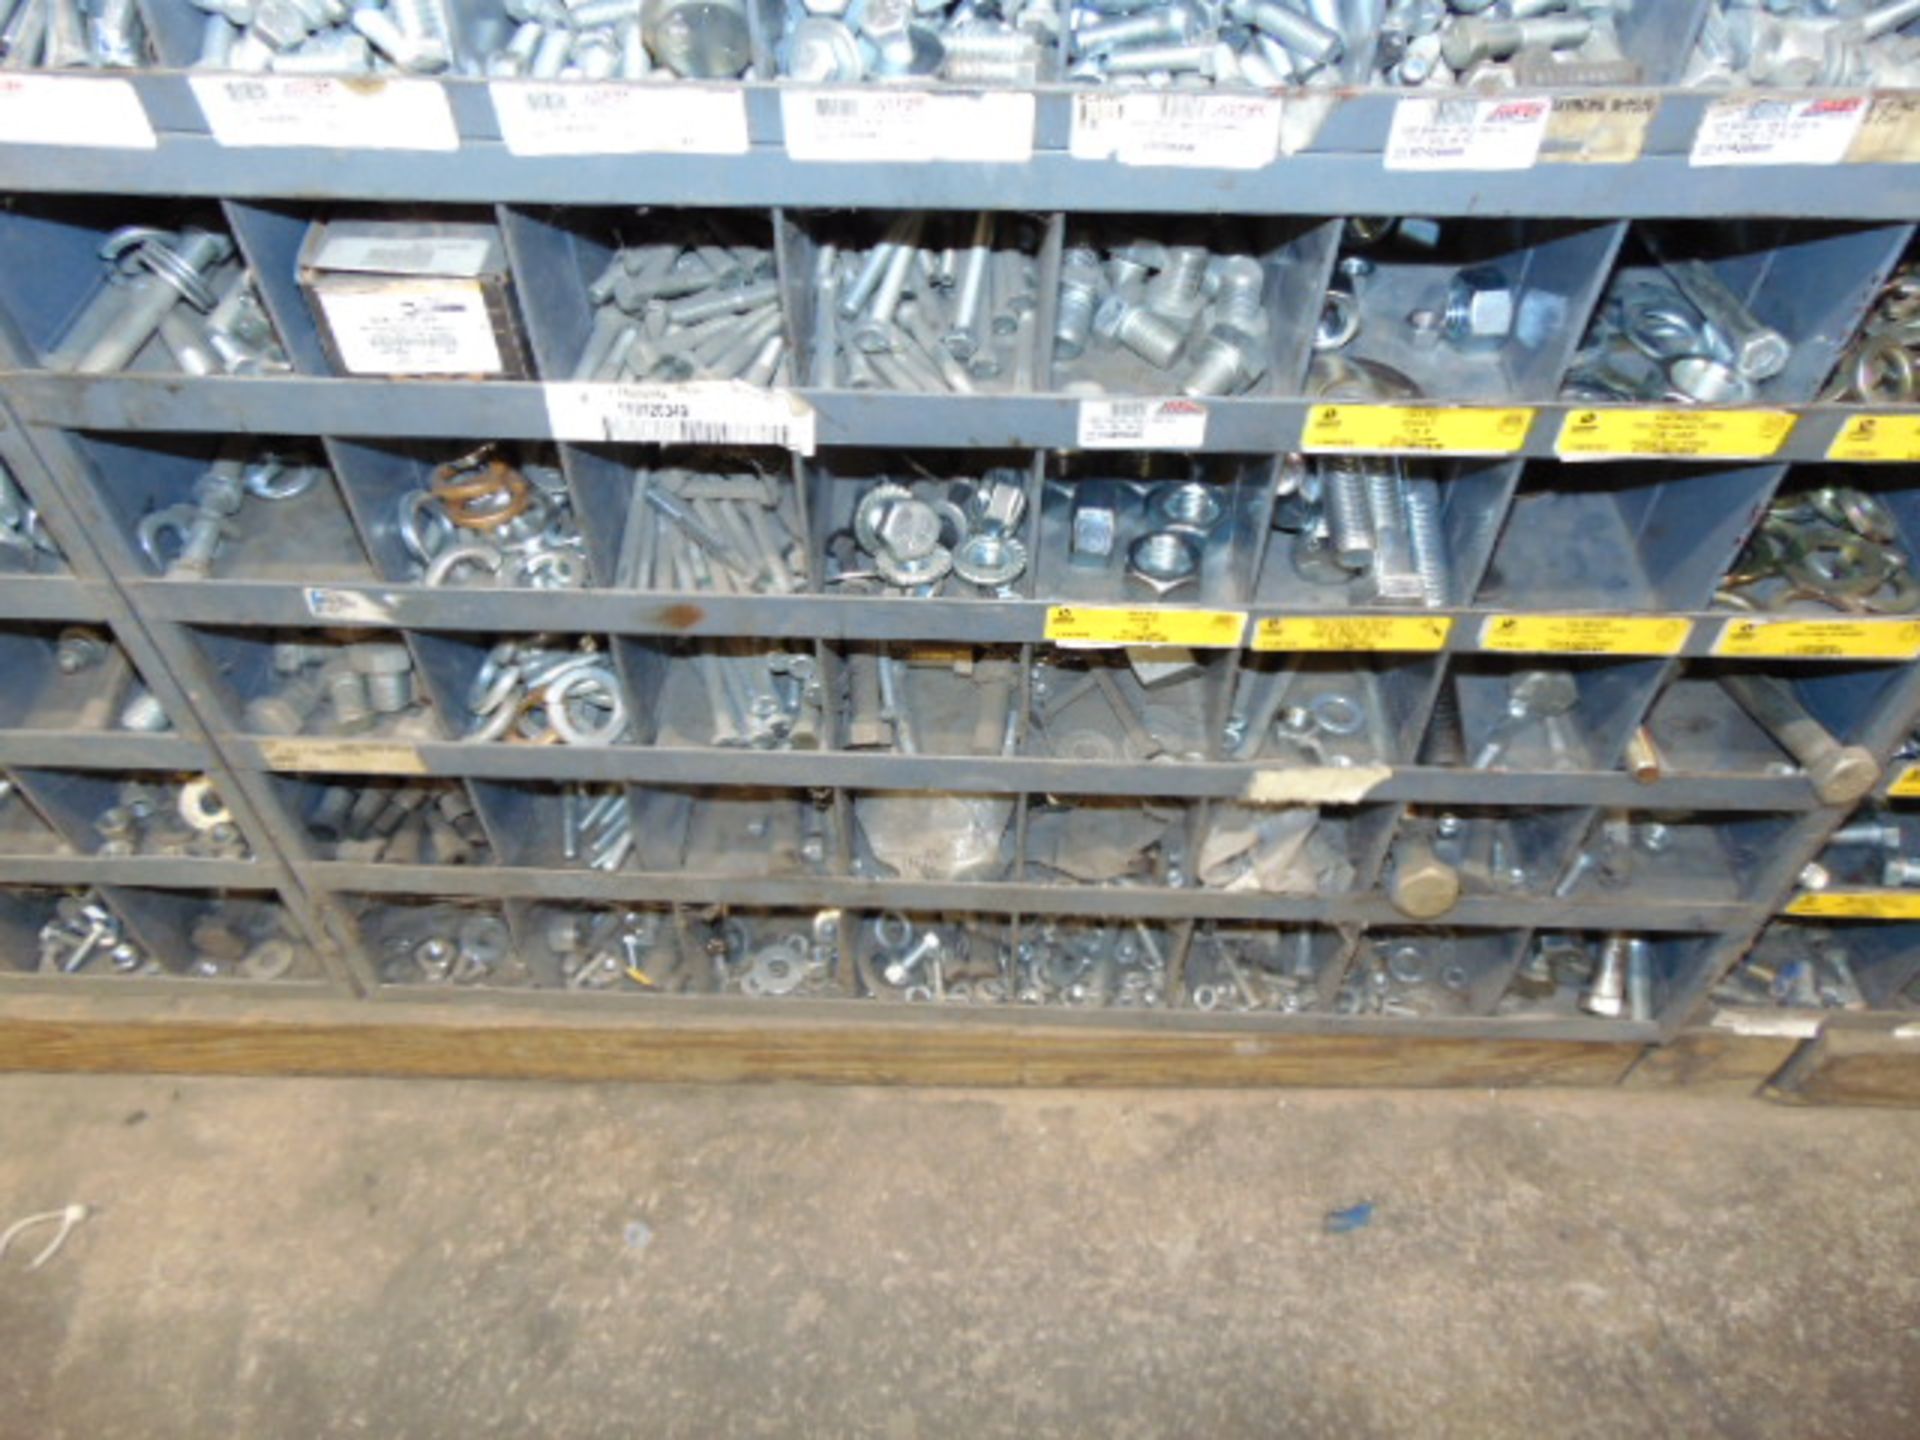 LOT OF NUTS & BOLTS, w/ (7) pigeon hole cabinets, assorted - Image 7 of 15